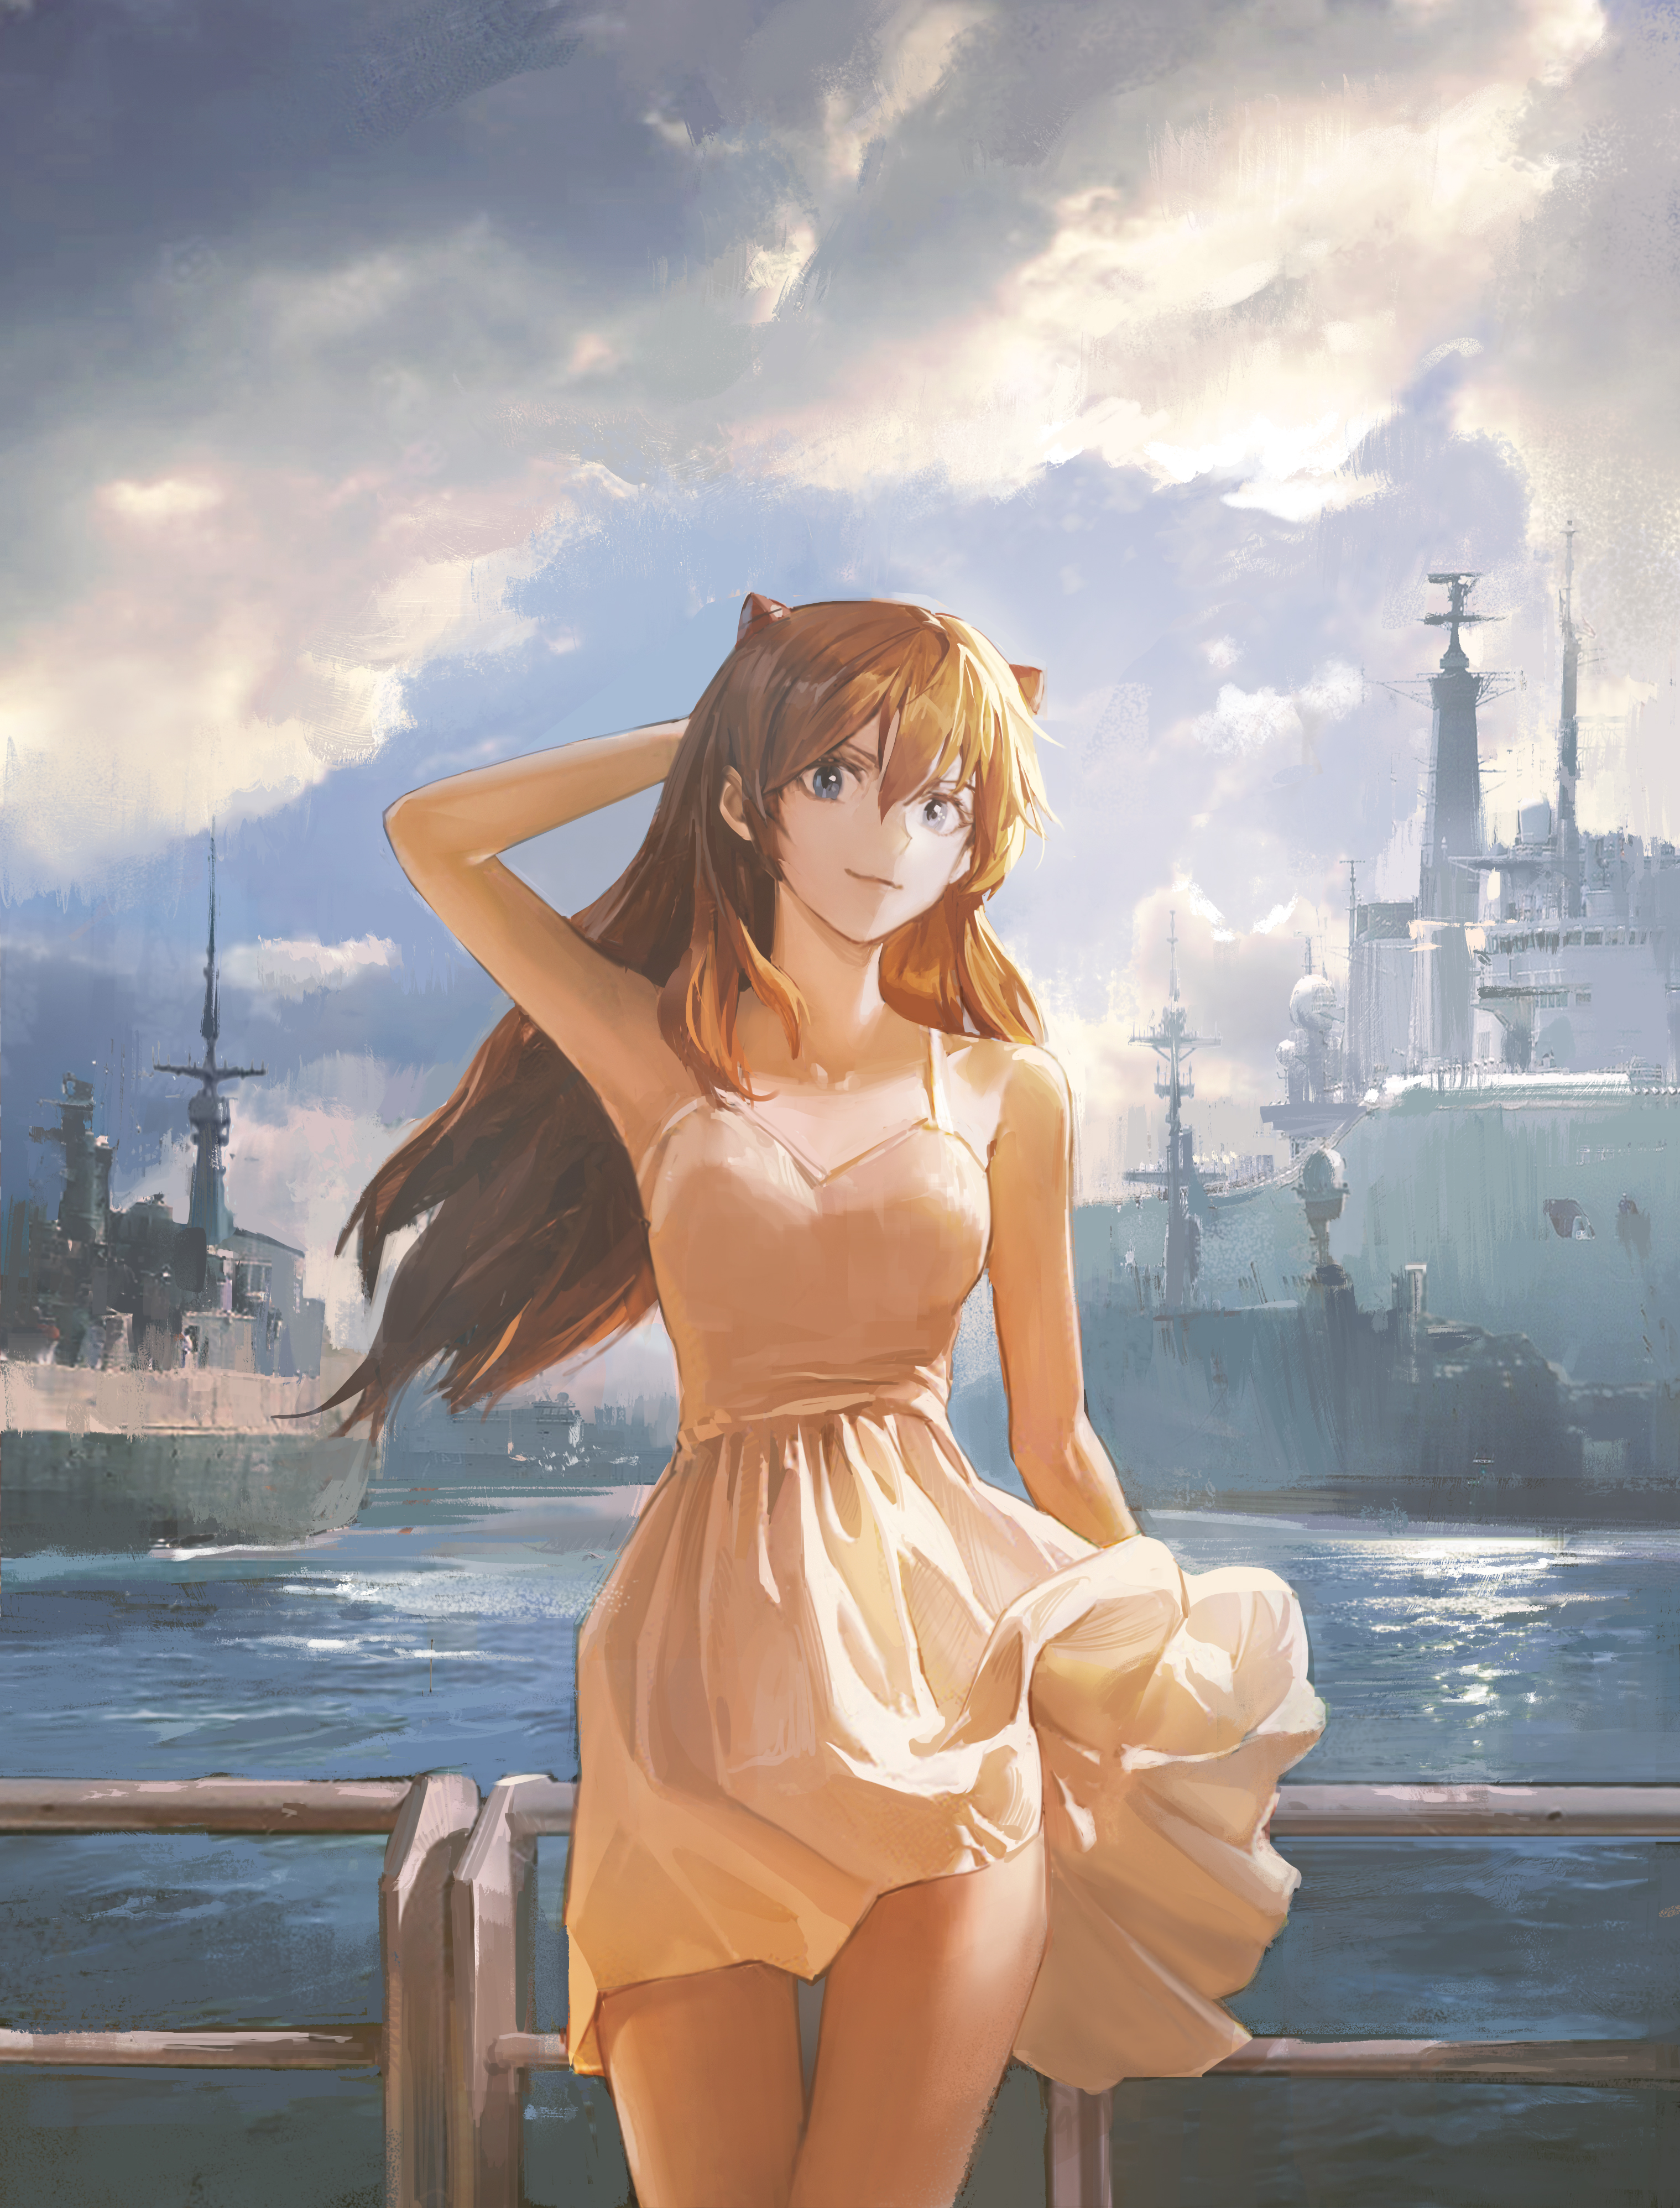 Anime 3038x3993 Neon Genesis Evangelion yellow dress thighs redhead anime girls blue eyes arm(s) behind head hair blowing in the wind lifting dress railing Asuka Langley Soryu long hair smiling anime 2D ocean view portrait display women outdoors aircraft carrier fan art arm support artwork Butter Squid standing looking at viewer military vehicle